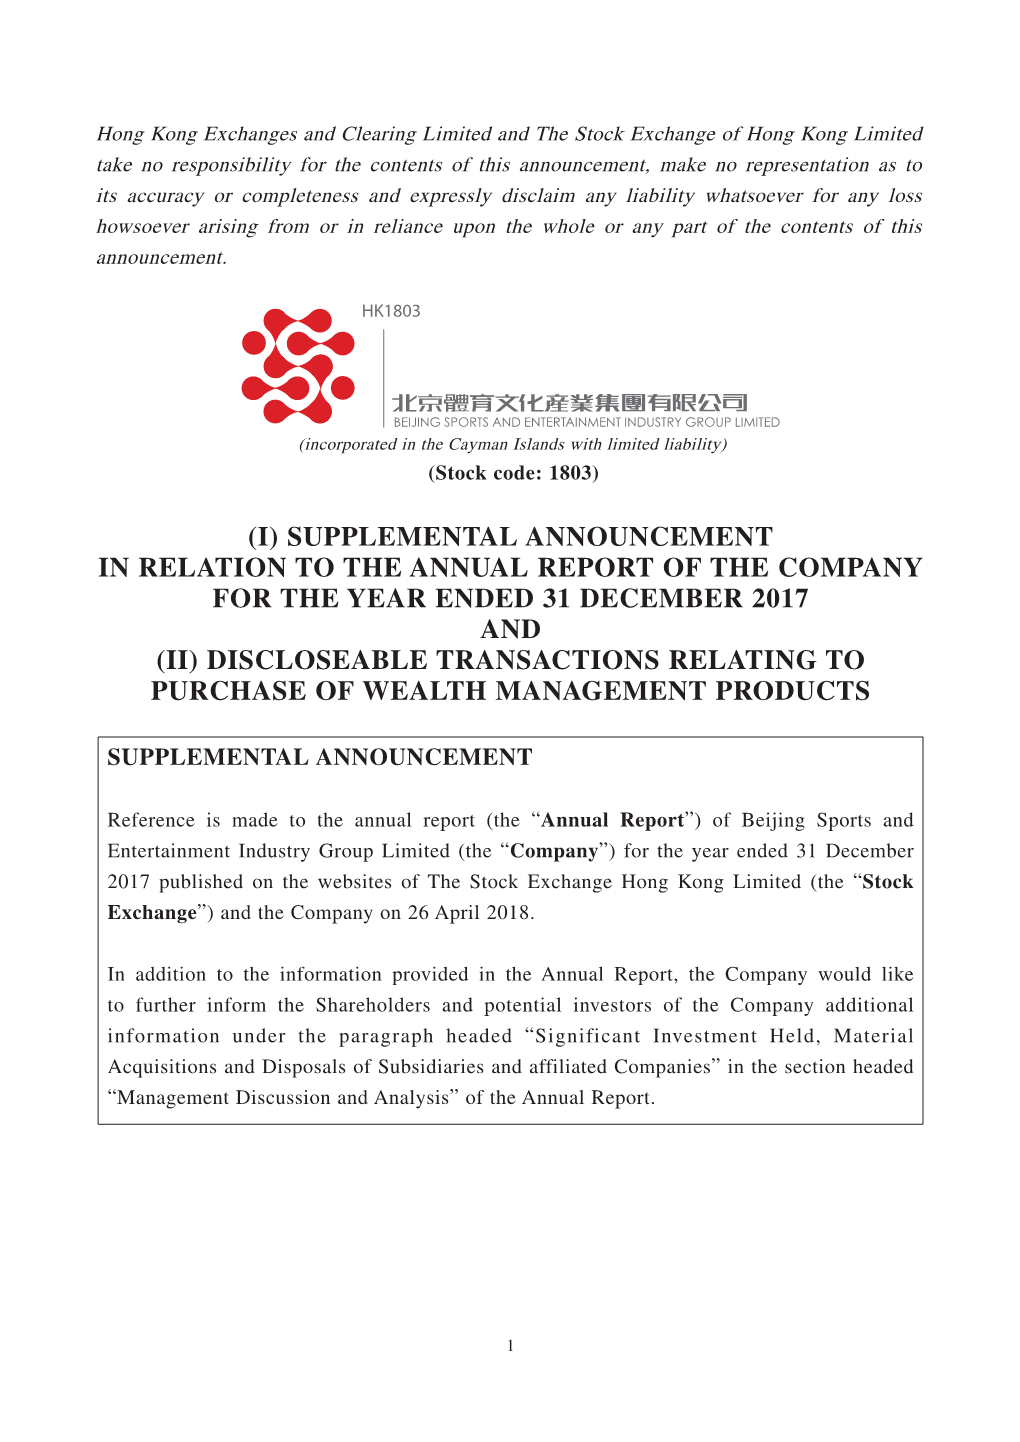 (I) Supplemental Announcement in Relation to the Annual Report of The